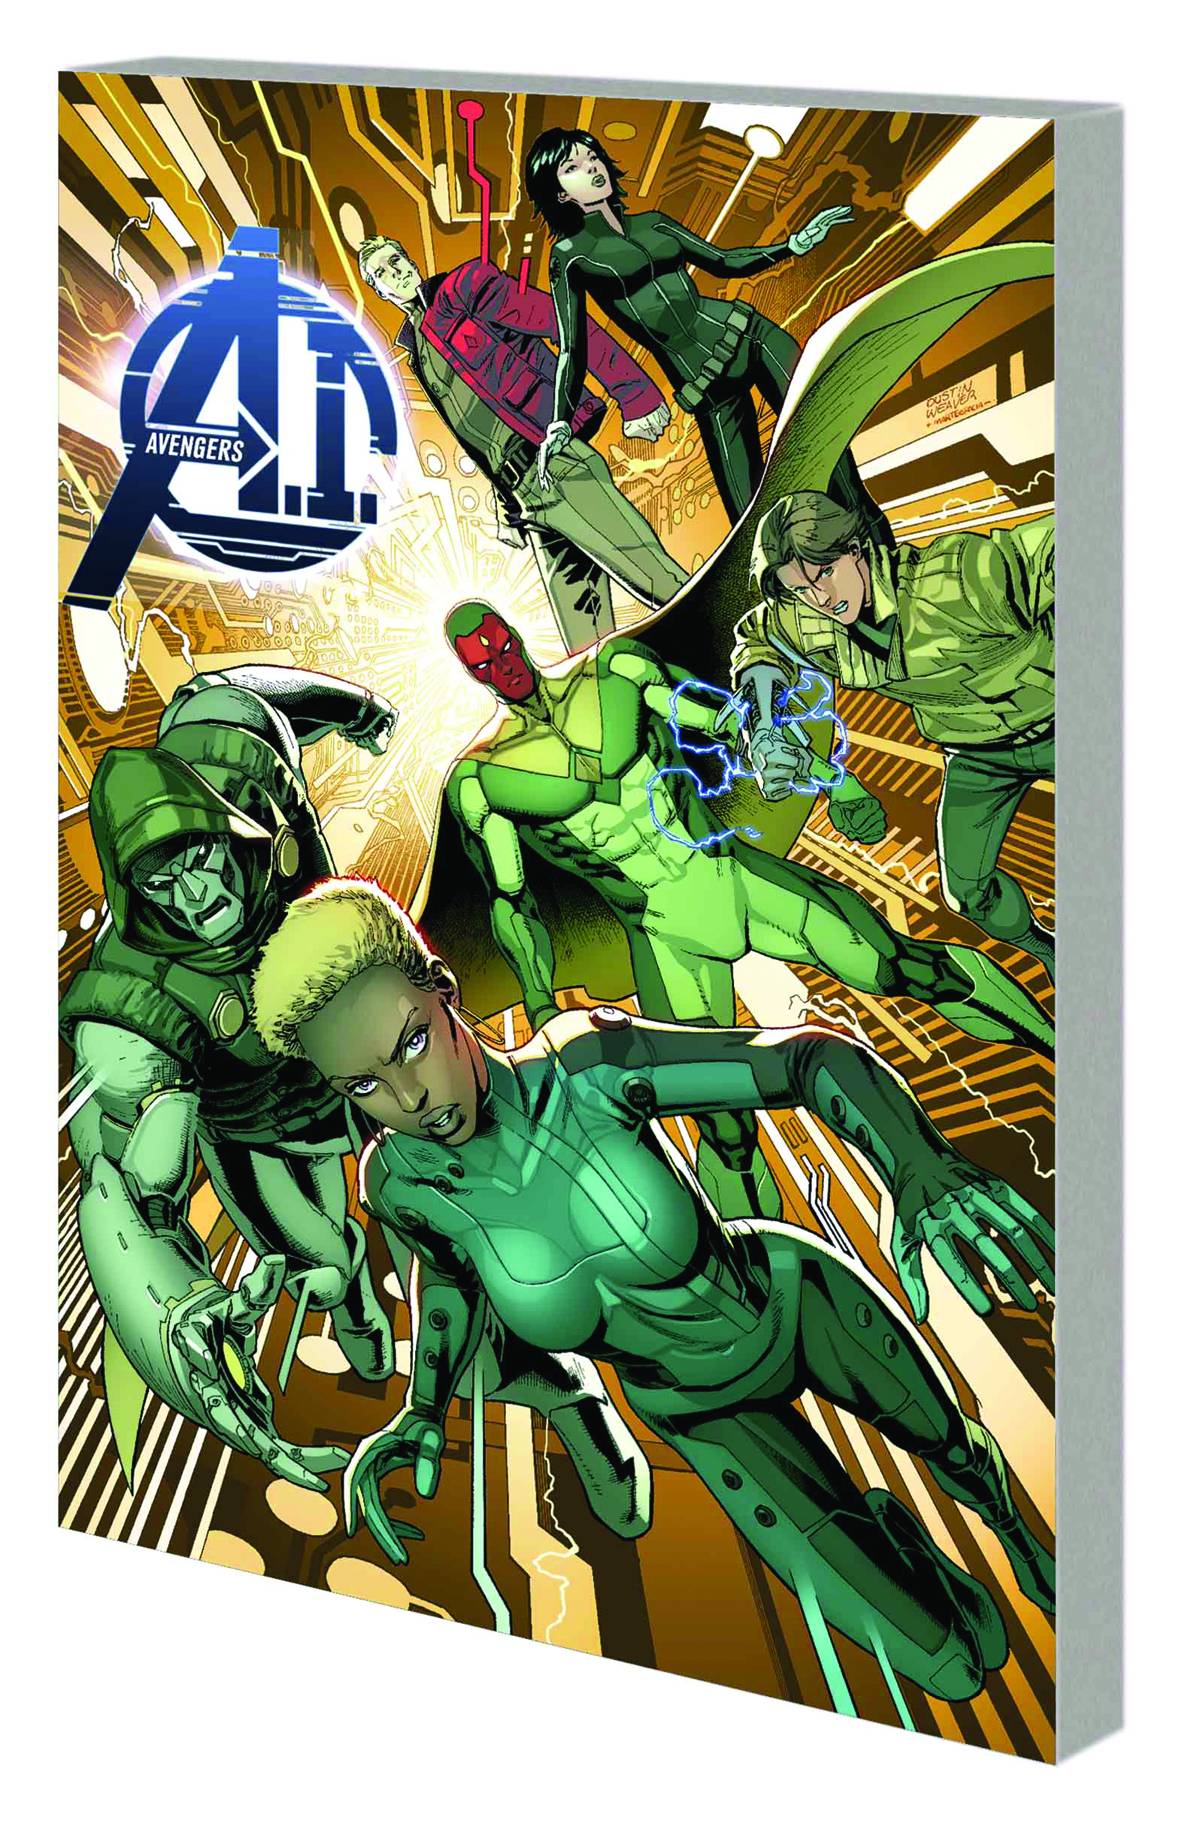 AVENGERS AI VOL 01: HUMAN AFTER ALL